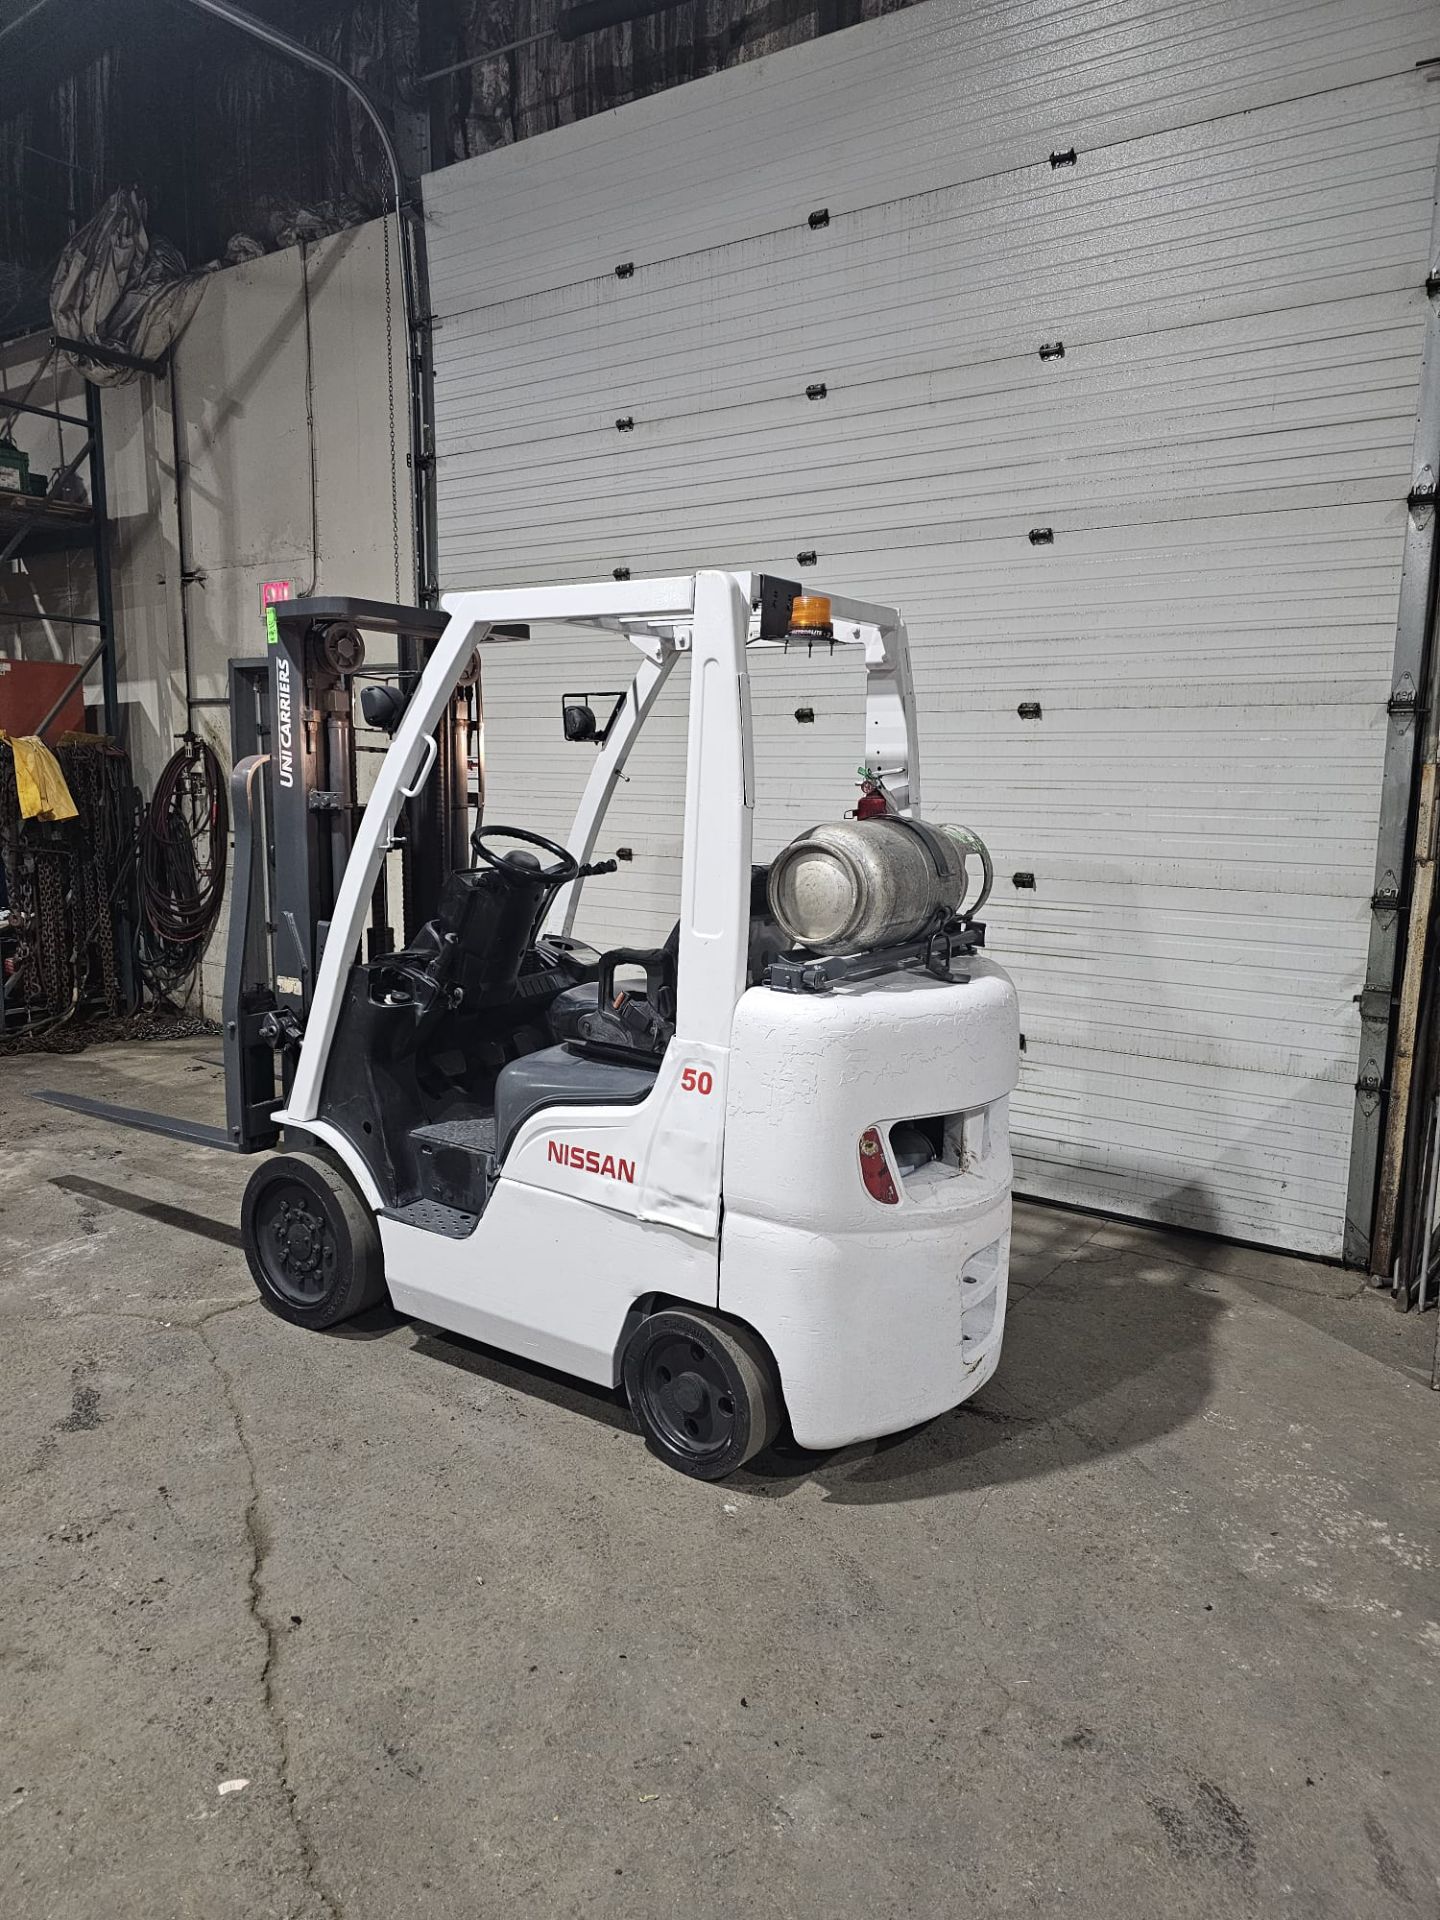 2013 Nissan 5000lbs Capacity LPG (Propane) forklift INDOOR 3-STAGE MAST with (no propane tank - Image 2 of 5